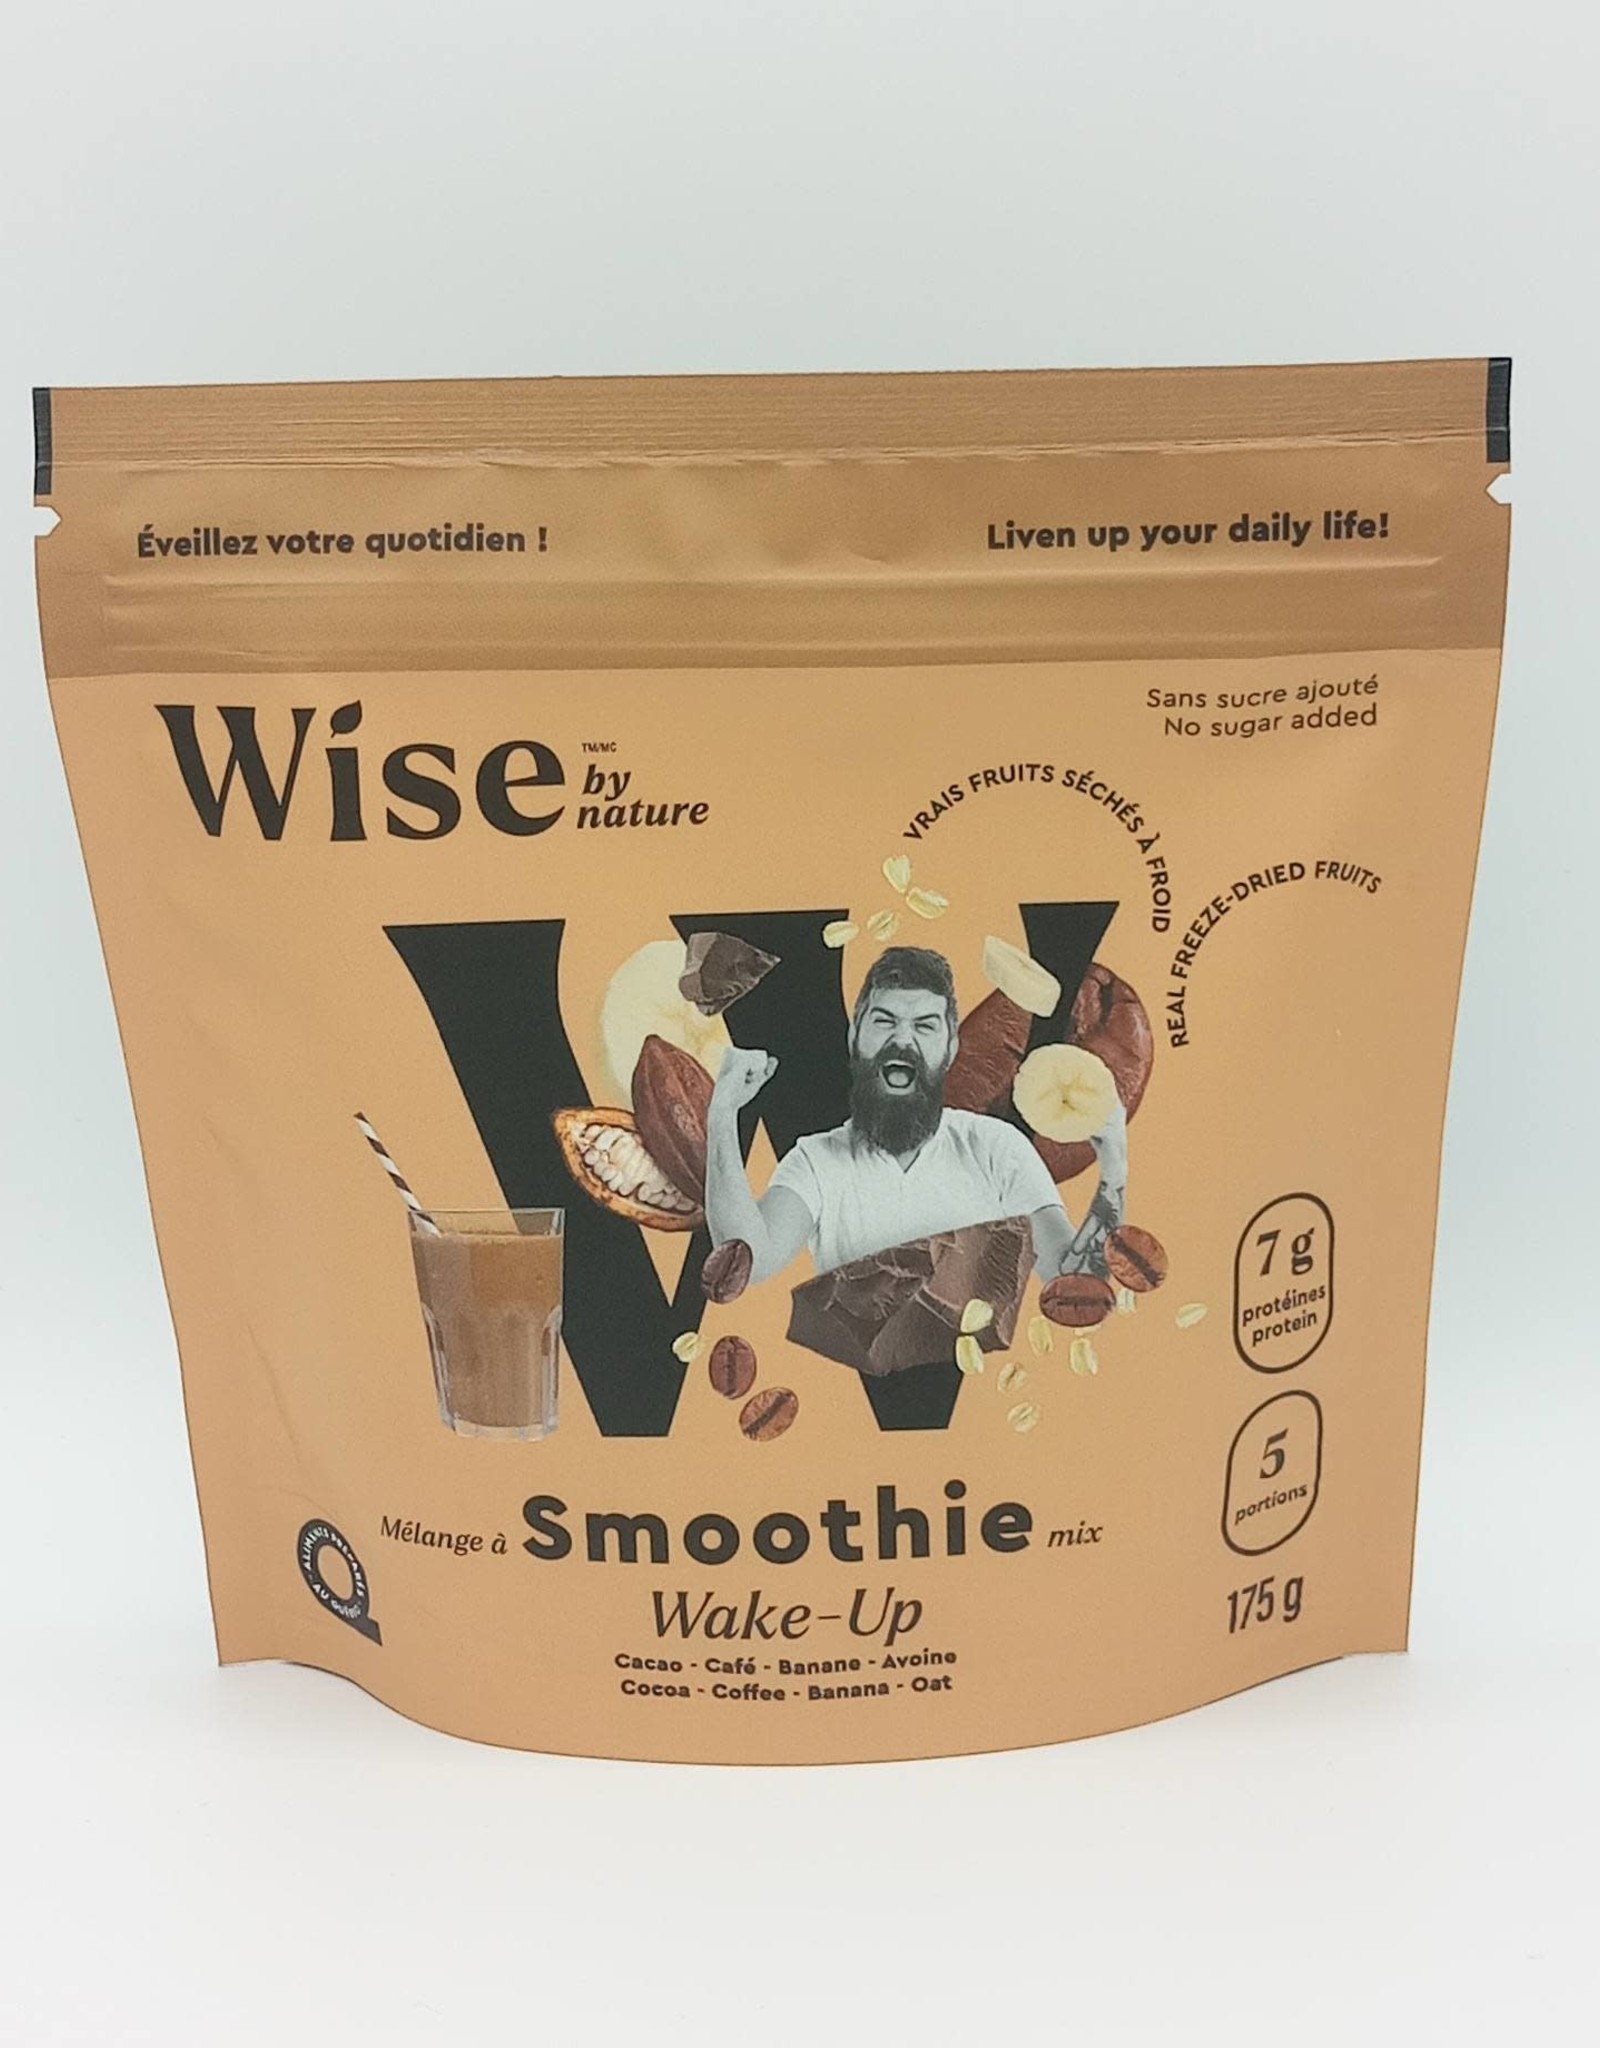 Wise By Nature Wise By Nature - Mélange À Smoothie, Wake-Up (175g)